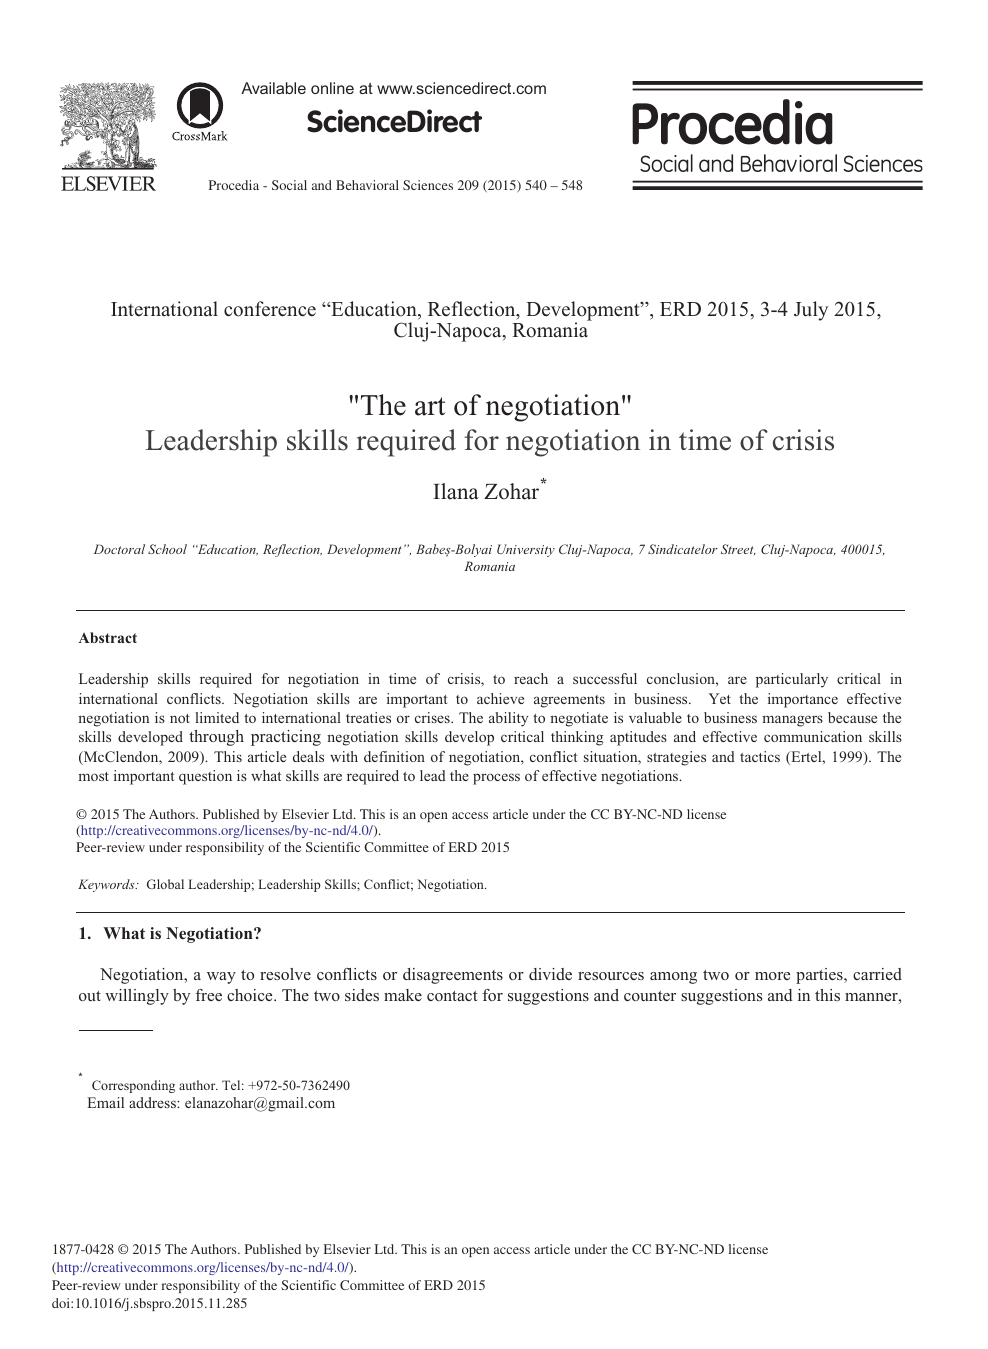 The Art Of Negotiation Leadership Skills Required For Negotiation In Time Of Crisis Topic Of Research Paper In Law Download Scholarly Article Pdf And Read For Free On Cyberleninka Open Science